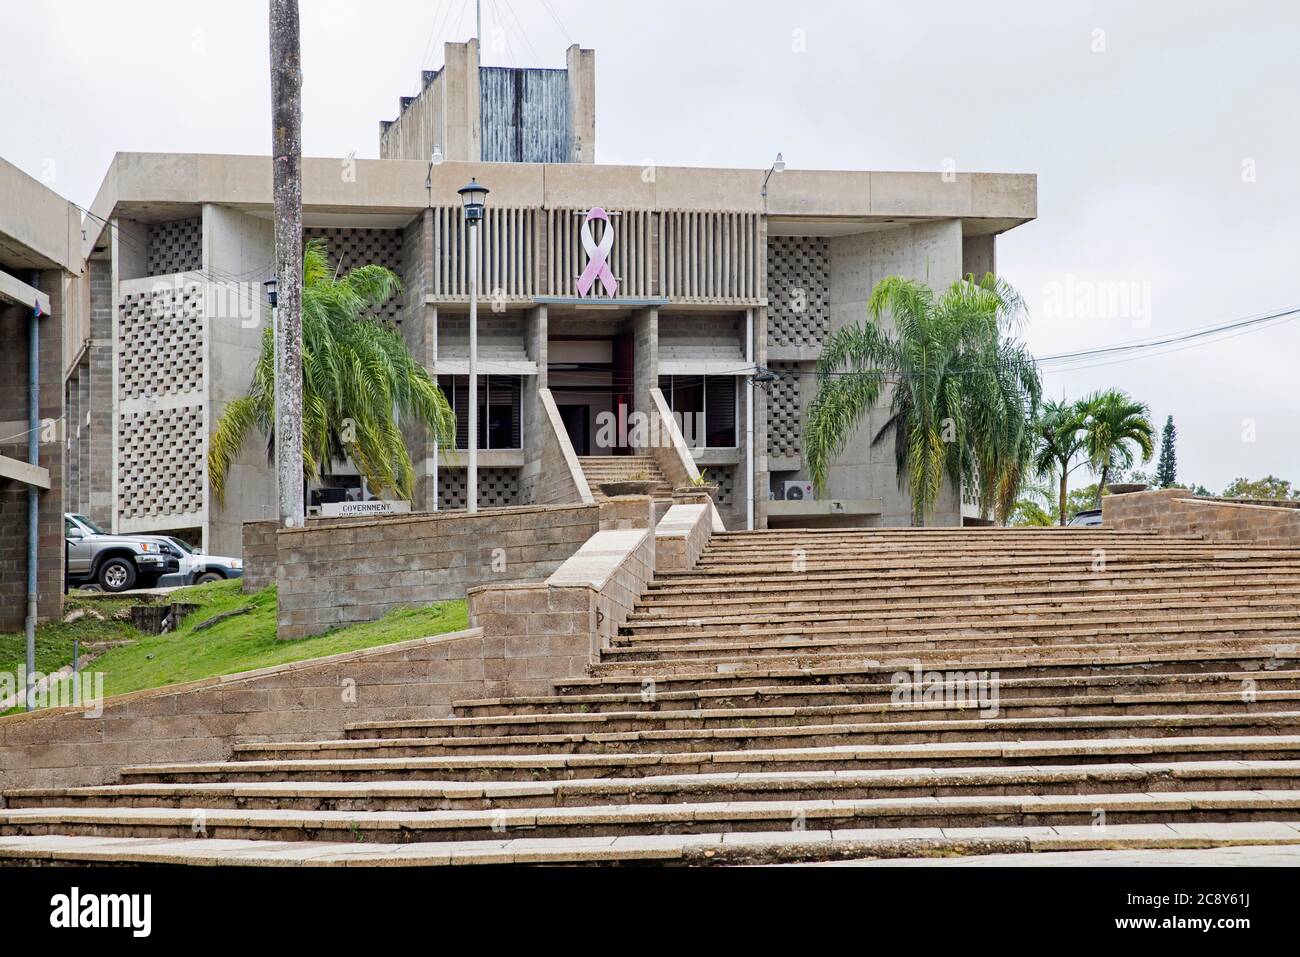 Belmopan National Assembly Building at Independence Plaza / Belmopan Parliament Building in the capital city of Belize, Cayo District, Caribbean Stock Photo